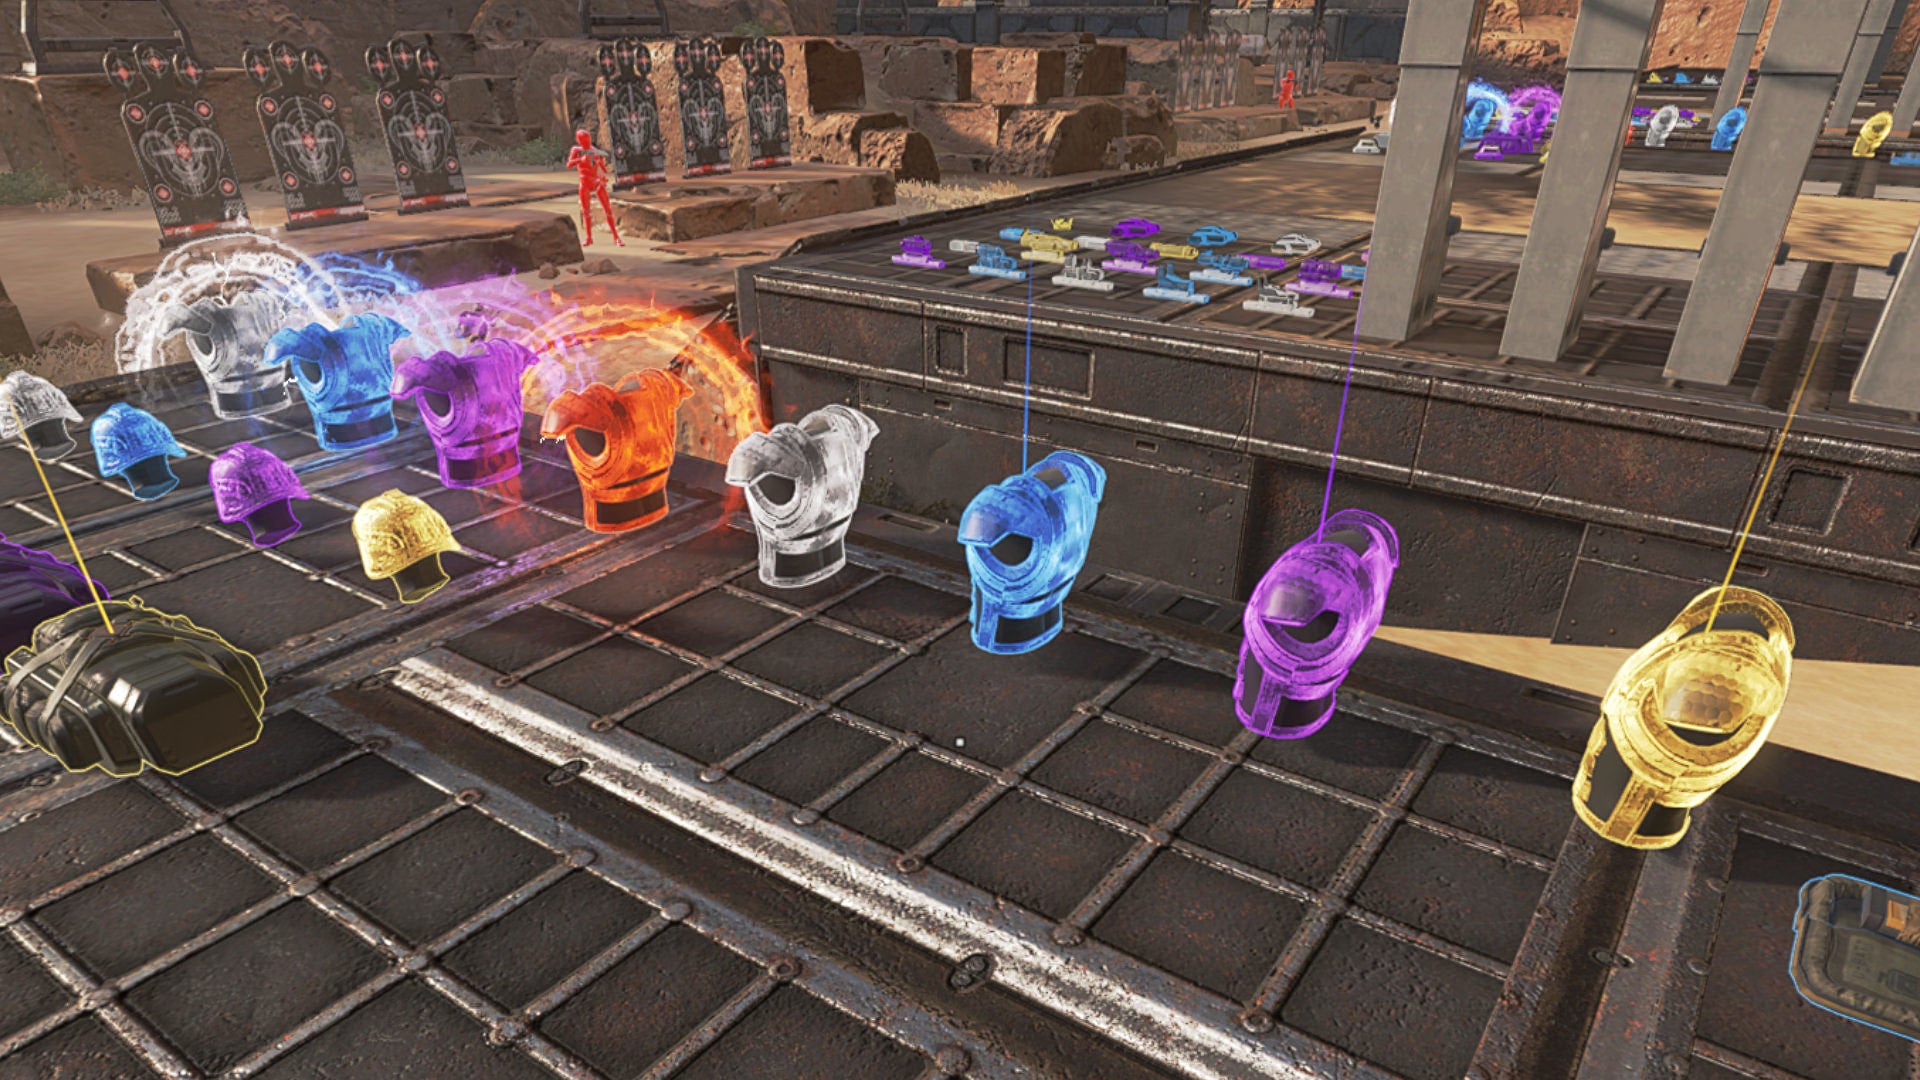 An Apex Legends screenshot of various pieces of Gear and Armor in the Firing Range.